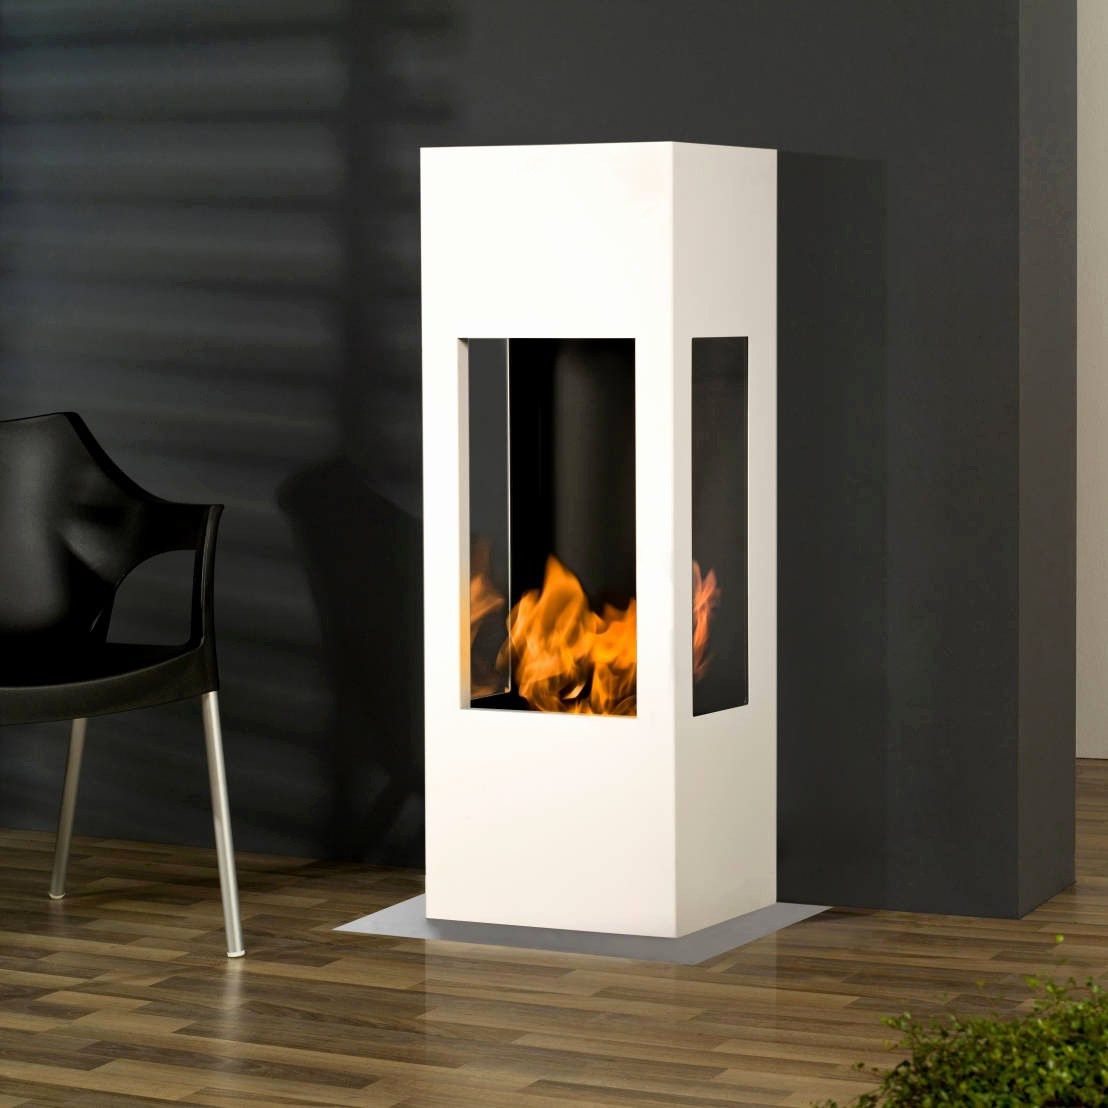 Fire and Ice Fireplace Awesome Ideen 44 Für Tischkamin Selber Bauen